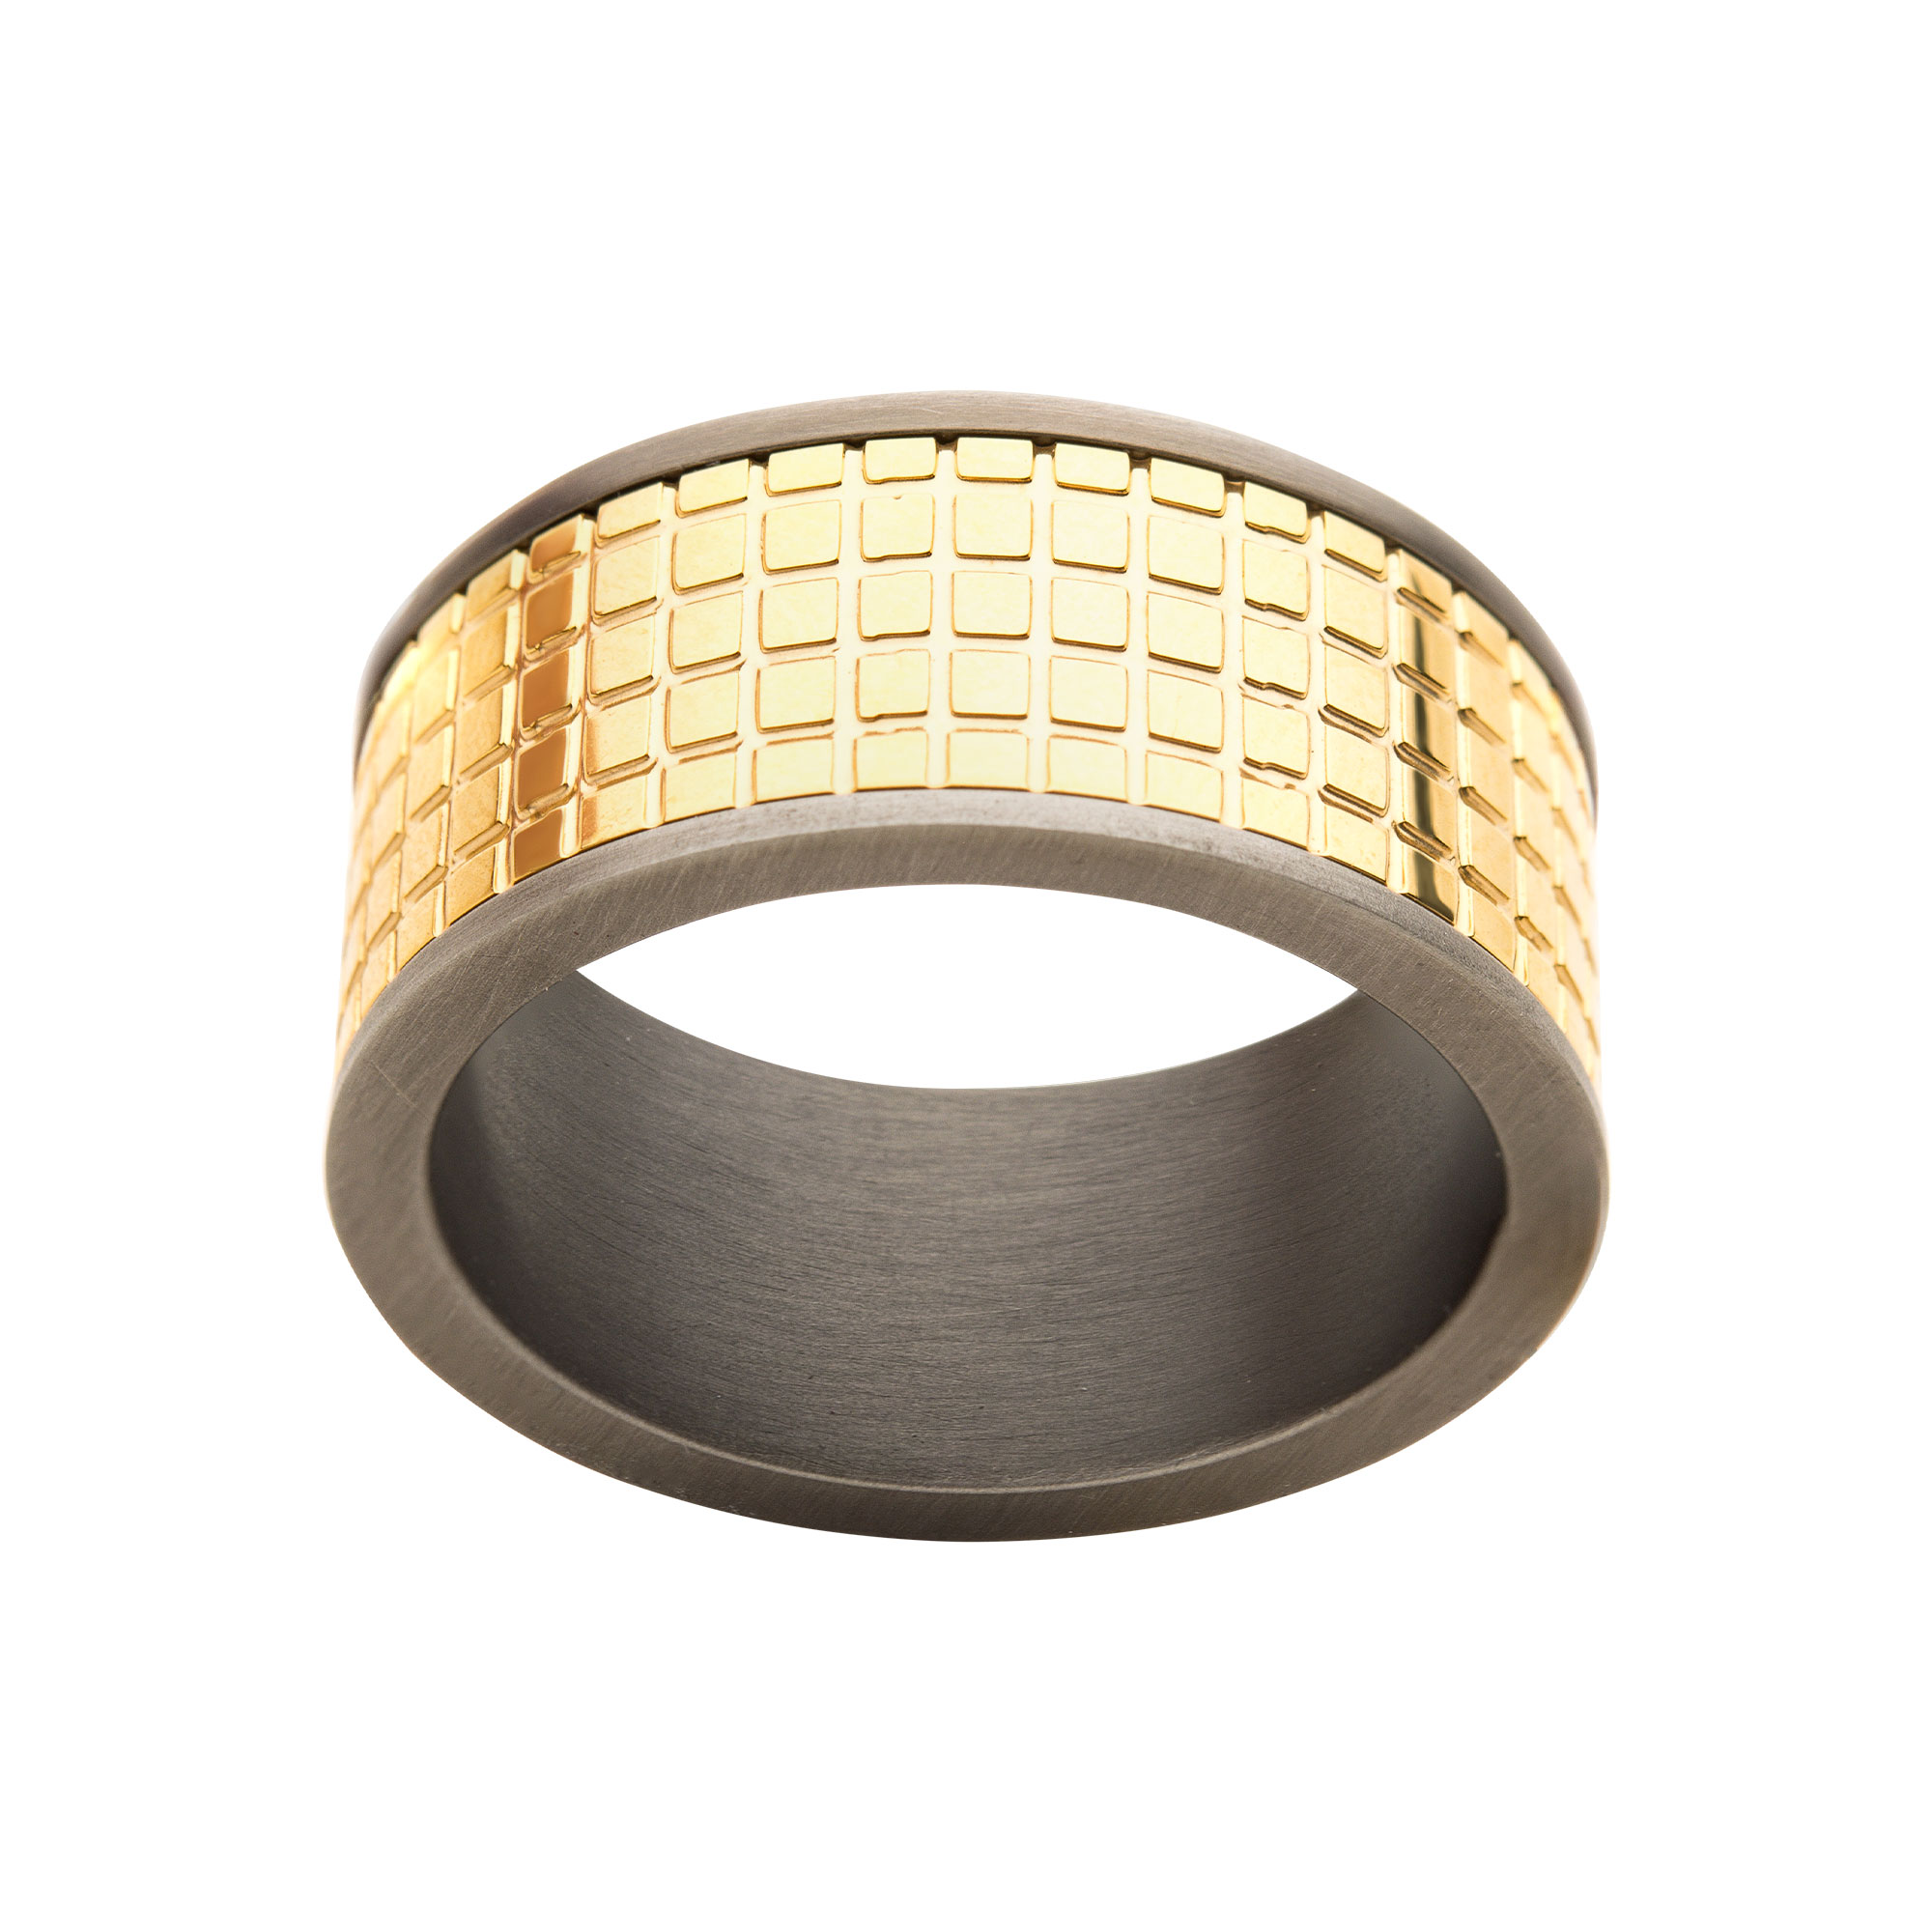 Gun Metal Plated with 18K Gold Plated Grid Inlay Ring Image 2 Ken Walker Jewelers Gig Harbor, WA